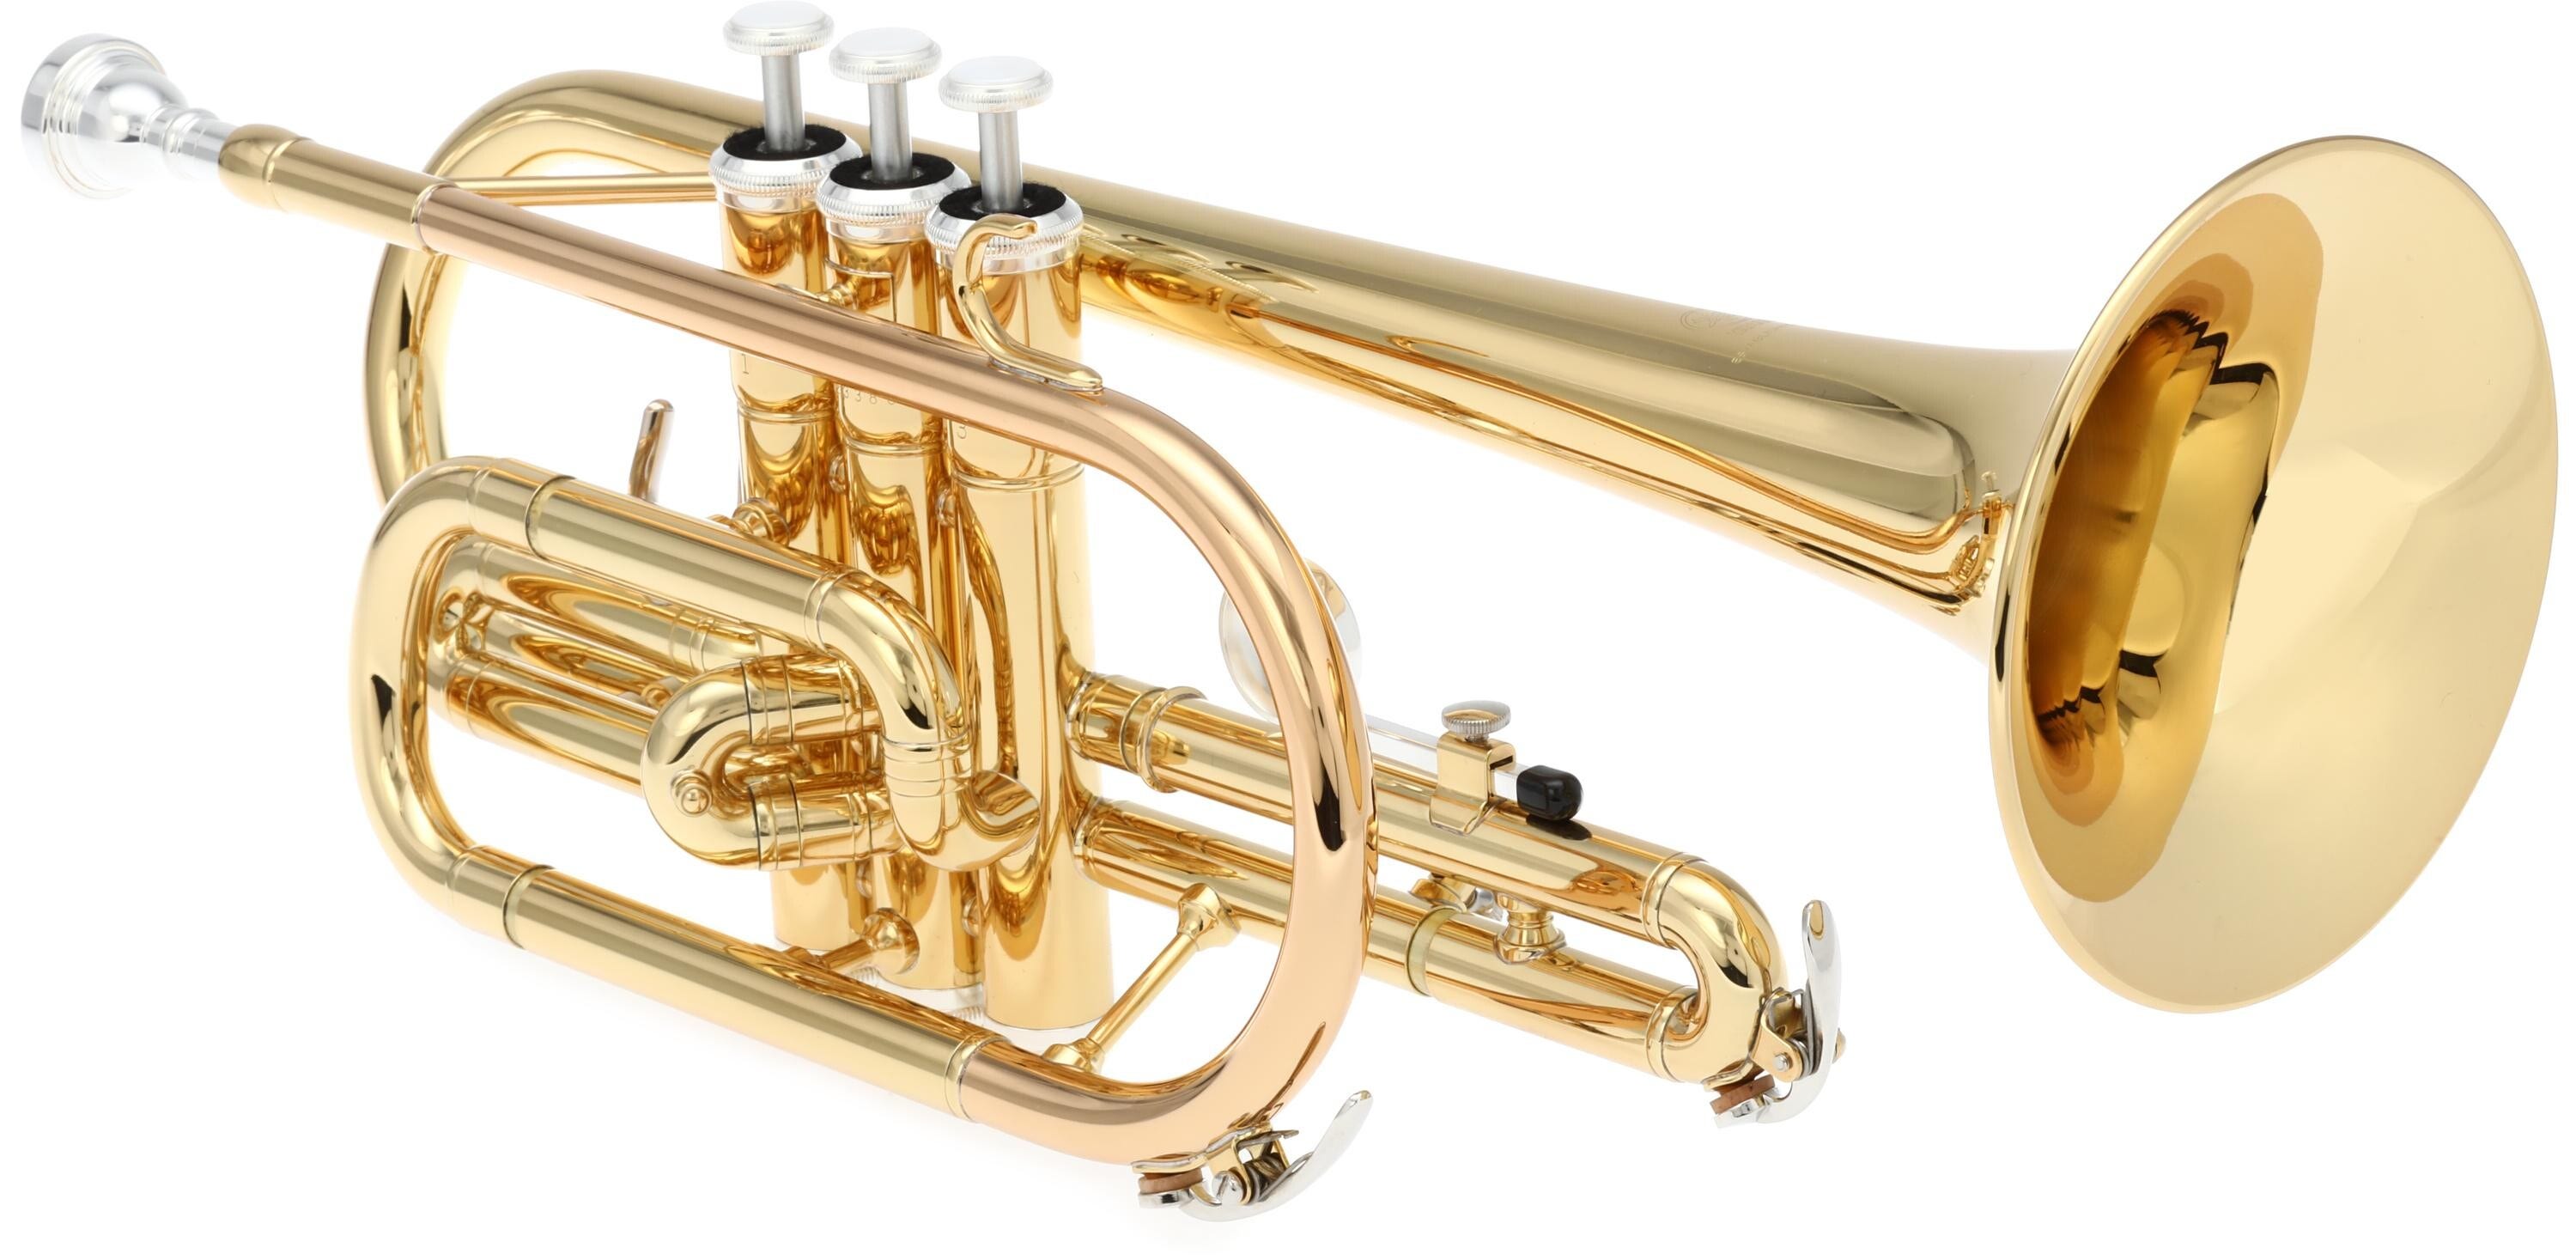 Gold Lacquer Cornet Horns, Wholesale Brass Instrument, Gift for